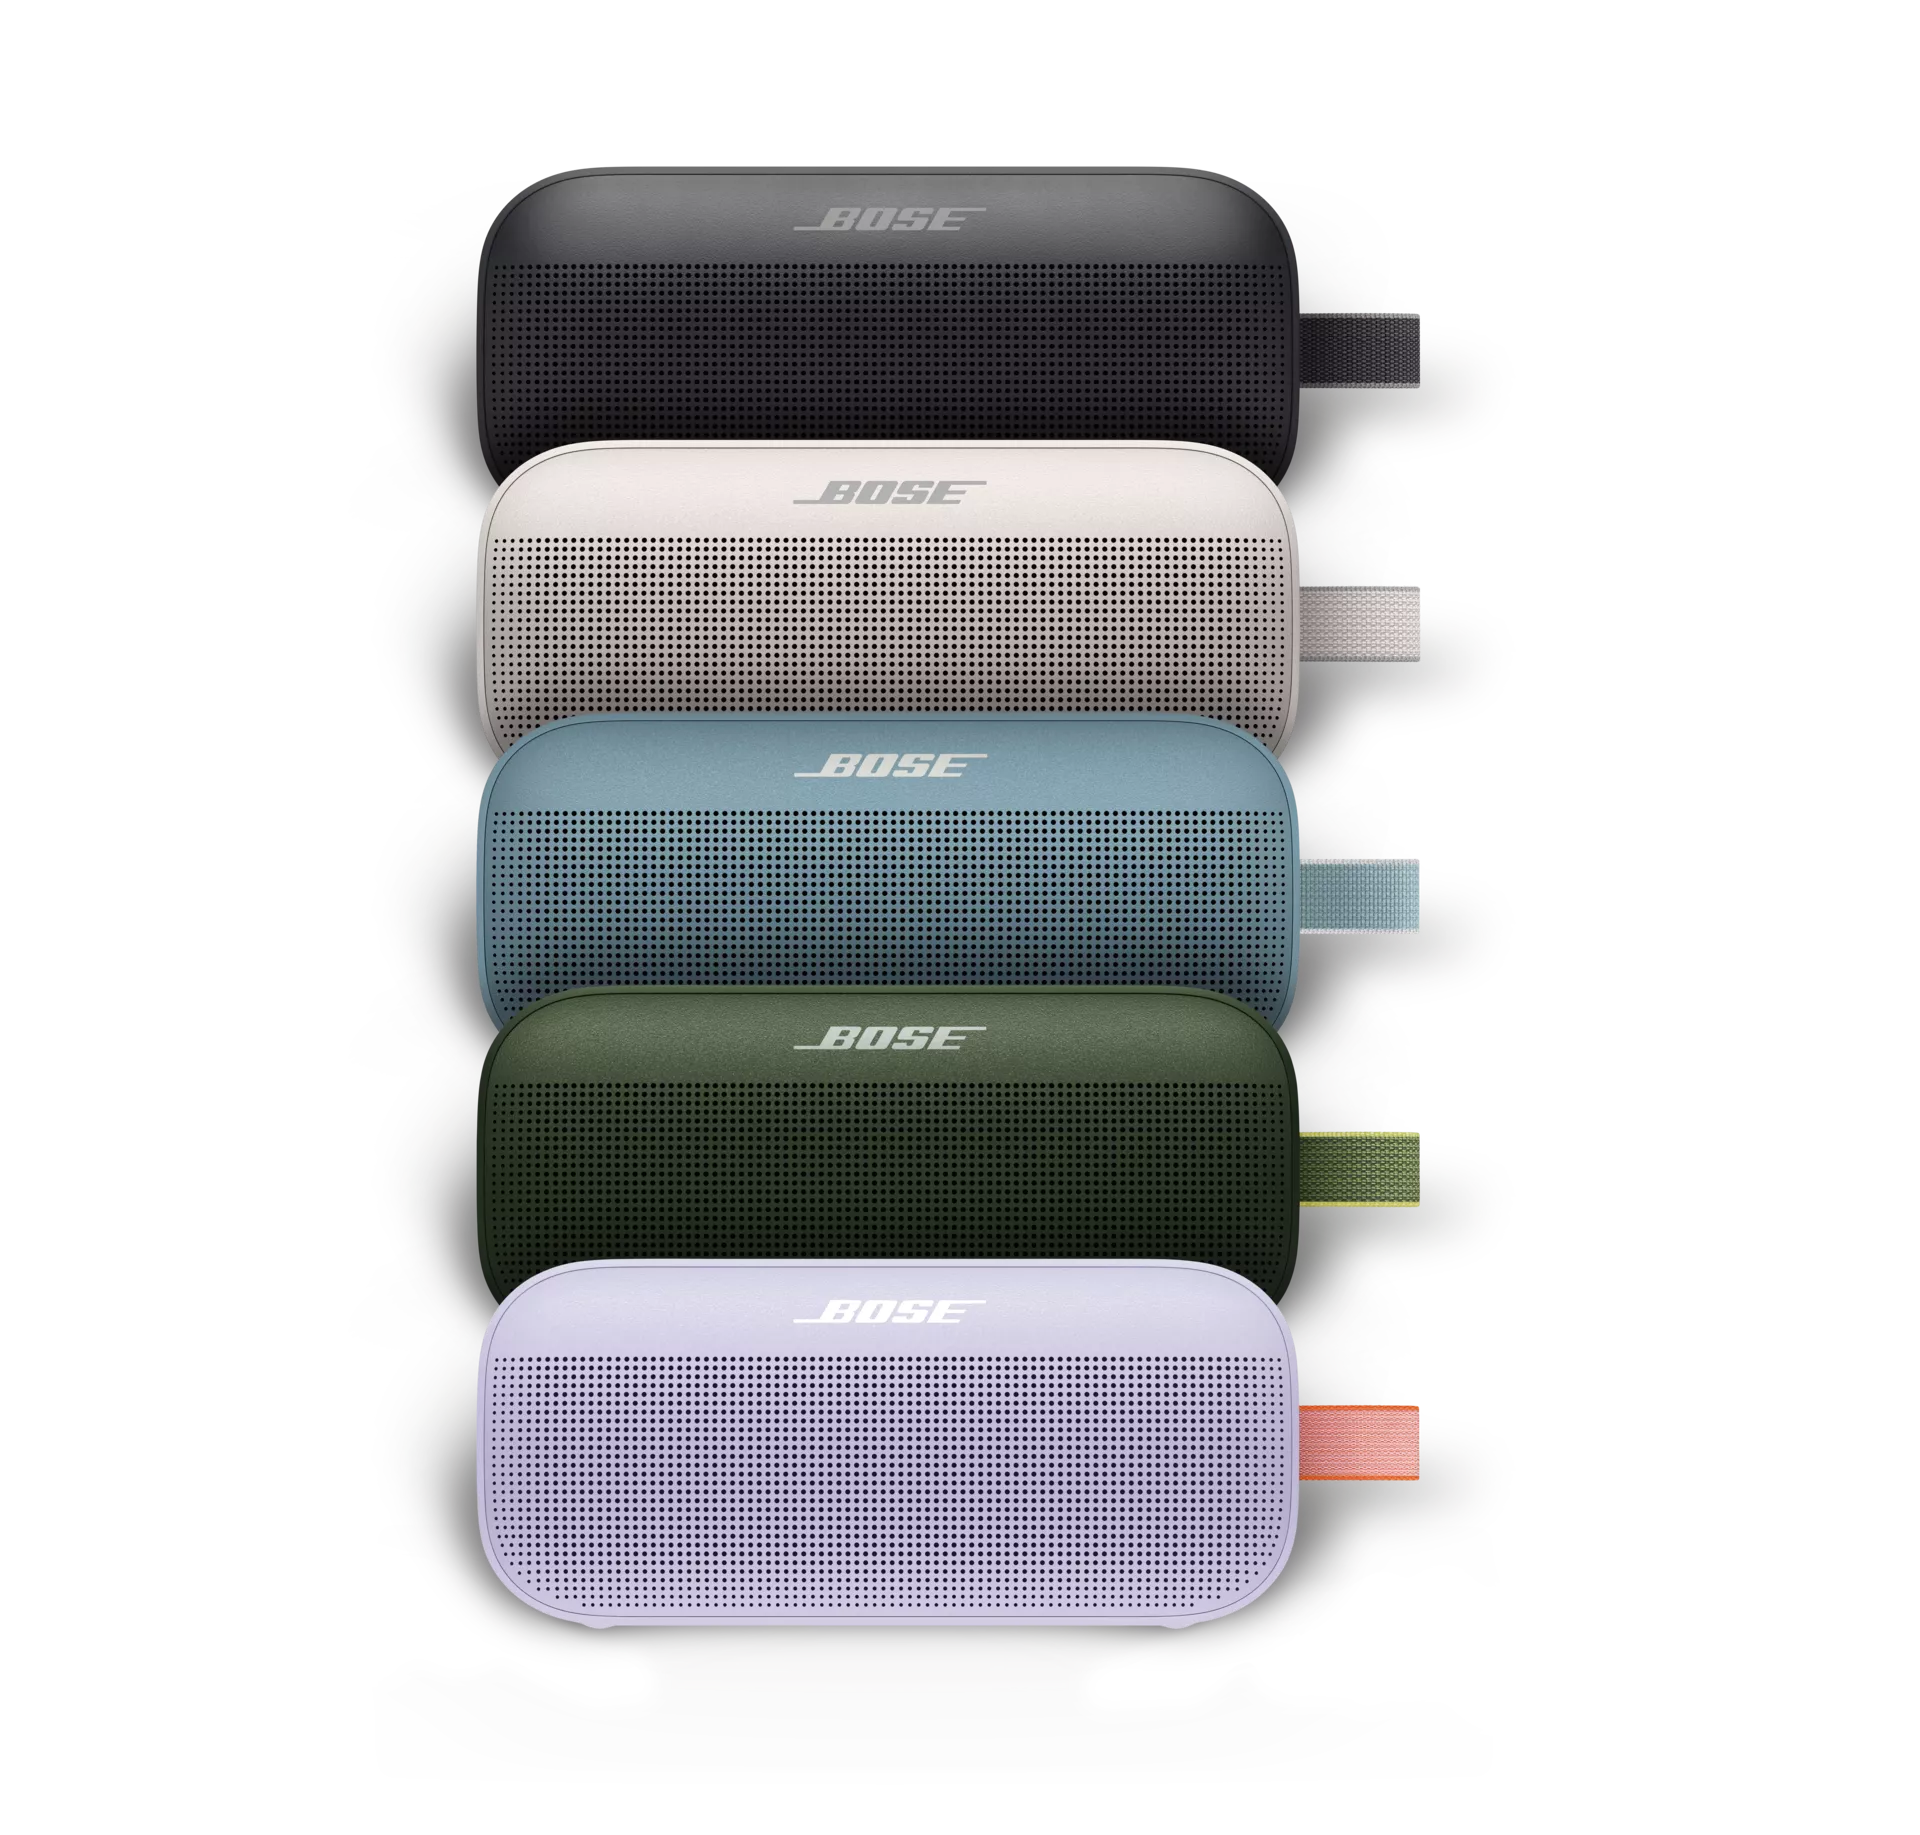 SoundLink Flex Bluetooth Speakers shown in Black, White Smoke, Stone Blue, Cypress Green, and Chilled Lilac 